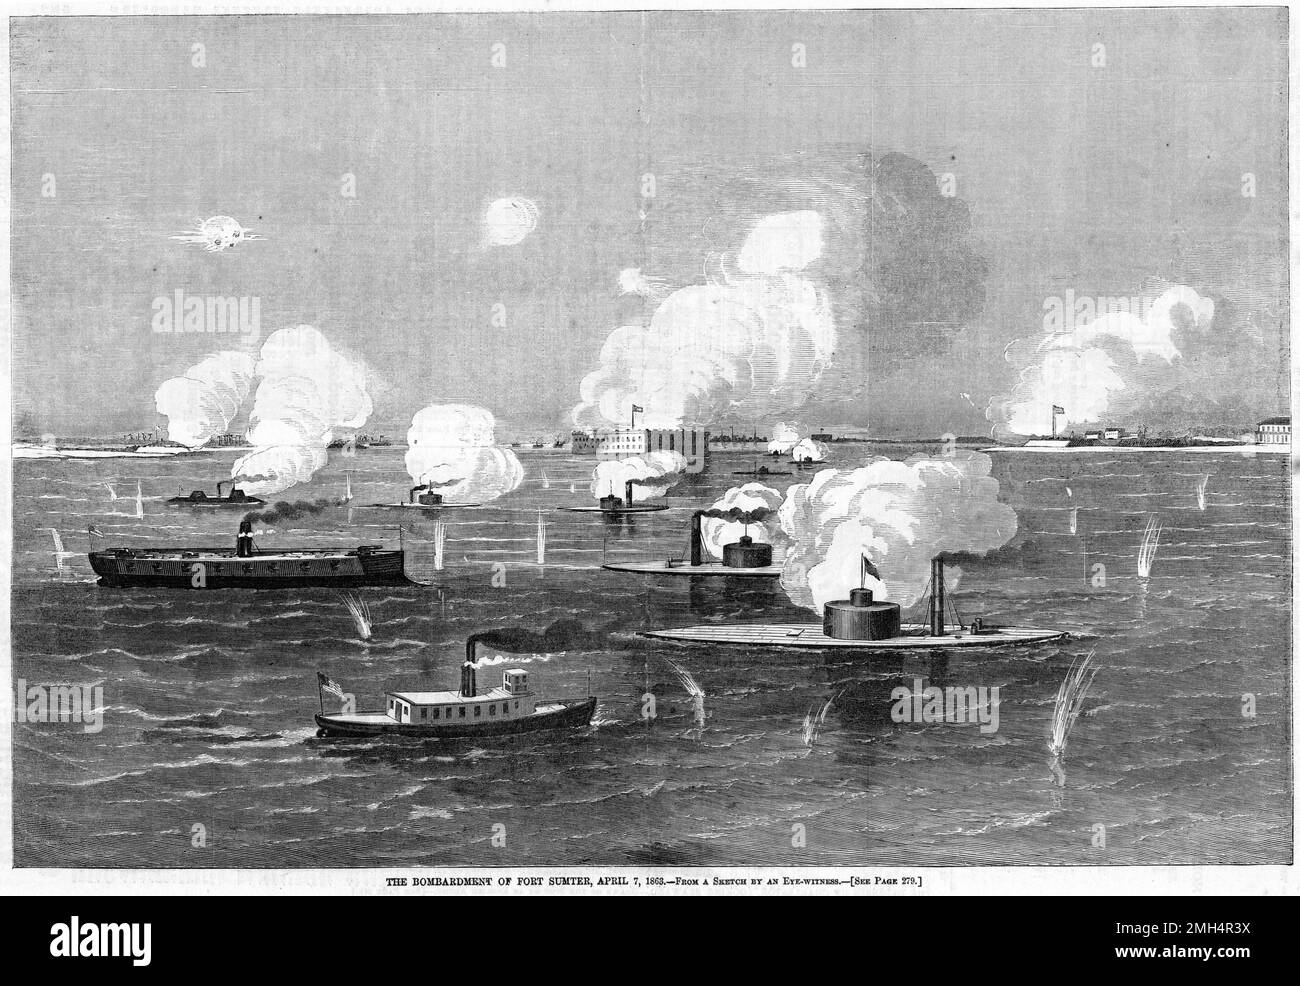 'The Bombardment Of Fort Sumter, April 7, 1863.' Wood Engraving by unknown, 1863. The Confederate bombardment and capture of Fort Sumter was the opening battle in the American Ciil War. Stock Photo